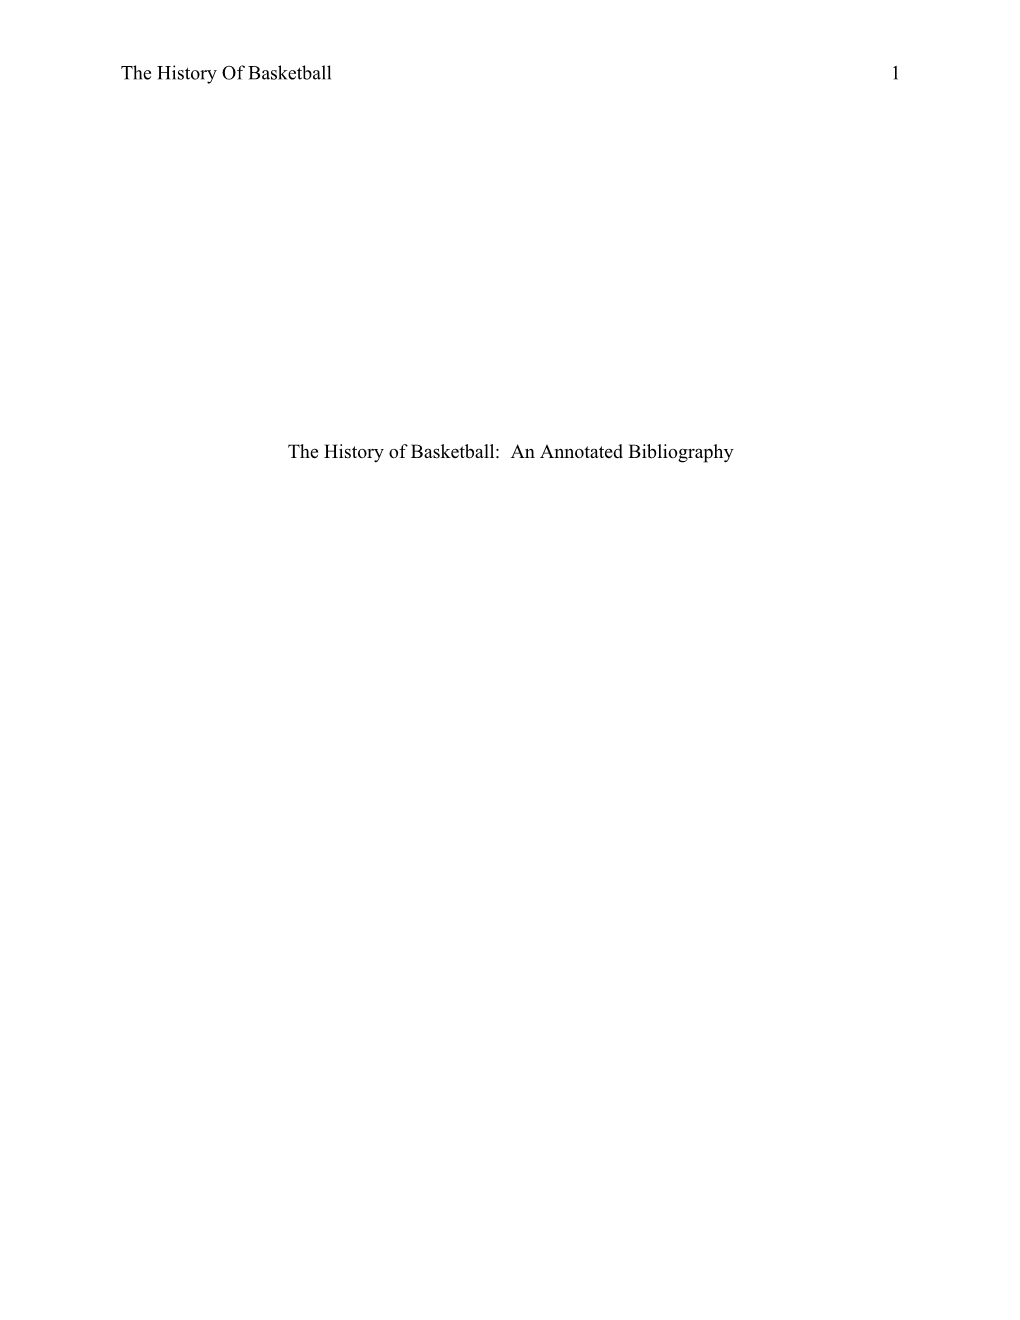 The History of Basketball: an Annotated Bibliography